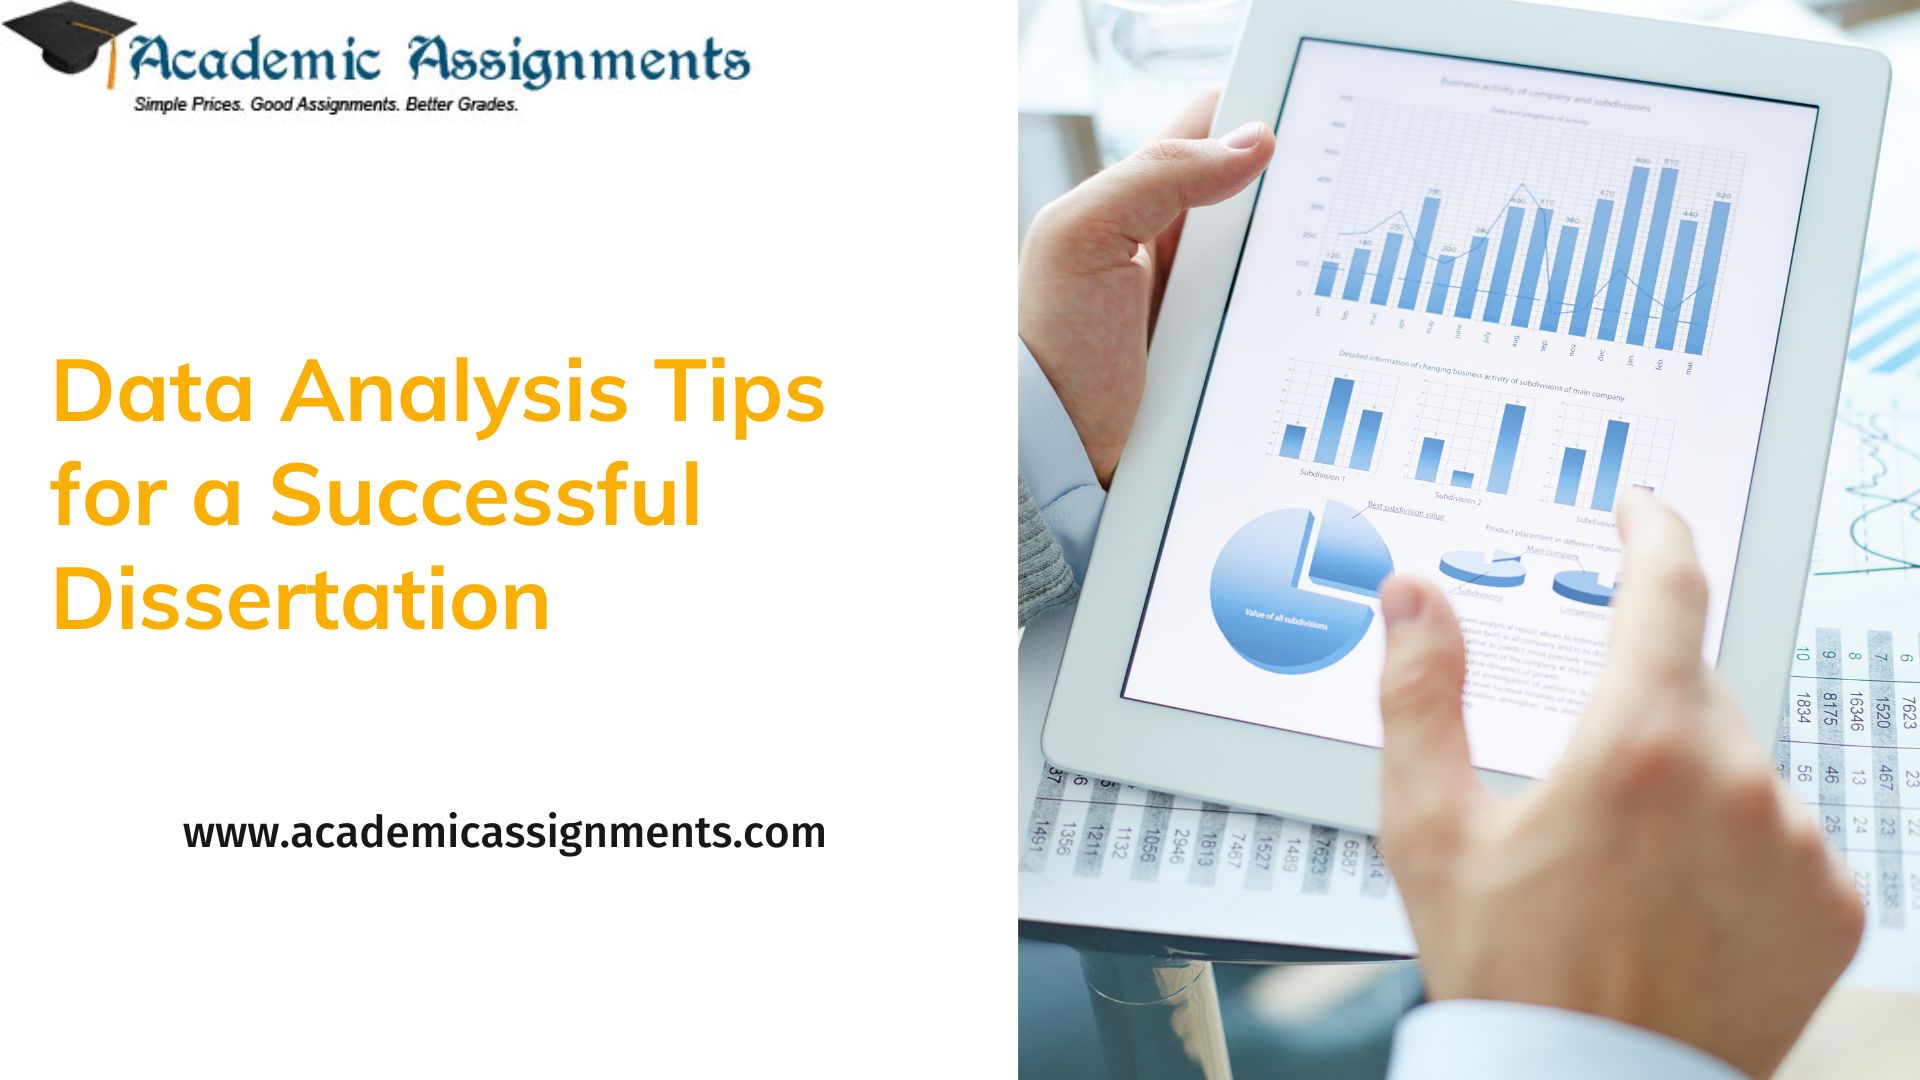 Data Analysis Tips for a Successful Dissertation